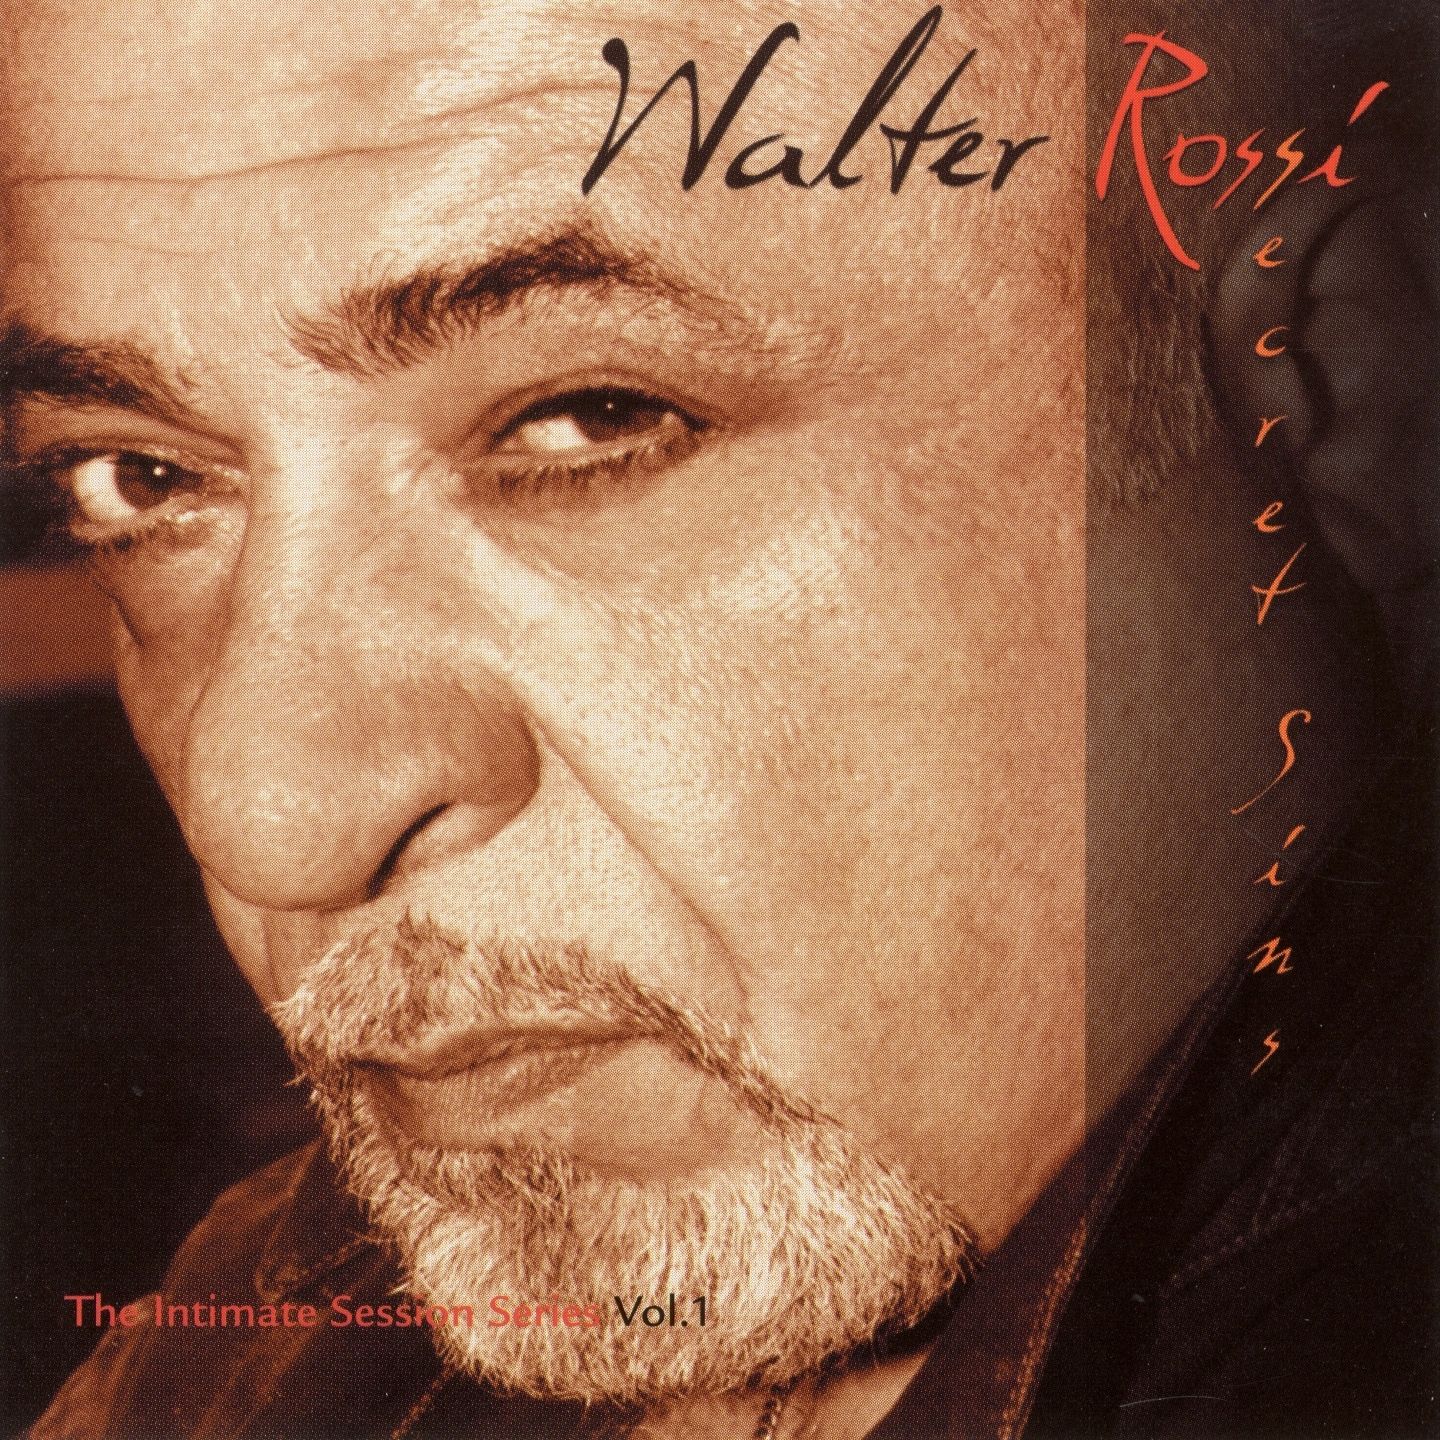 Walter Rossi - Secret Sins: The Intimate Session Series, Volume 1 (2004) (Rock) (flac)